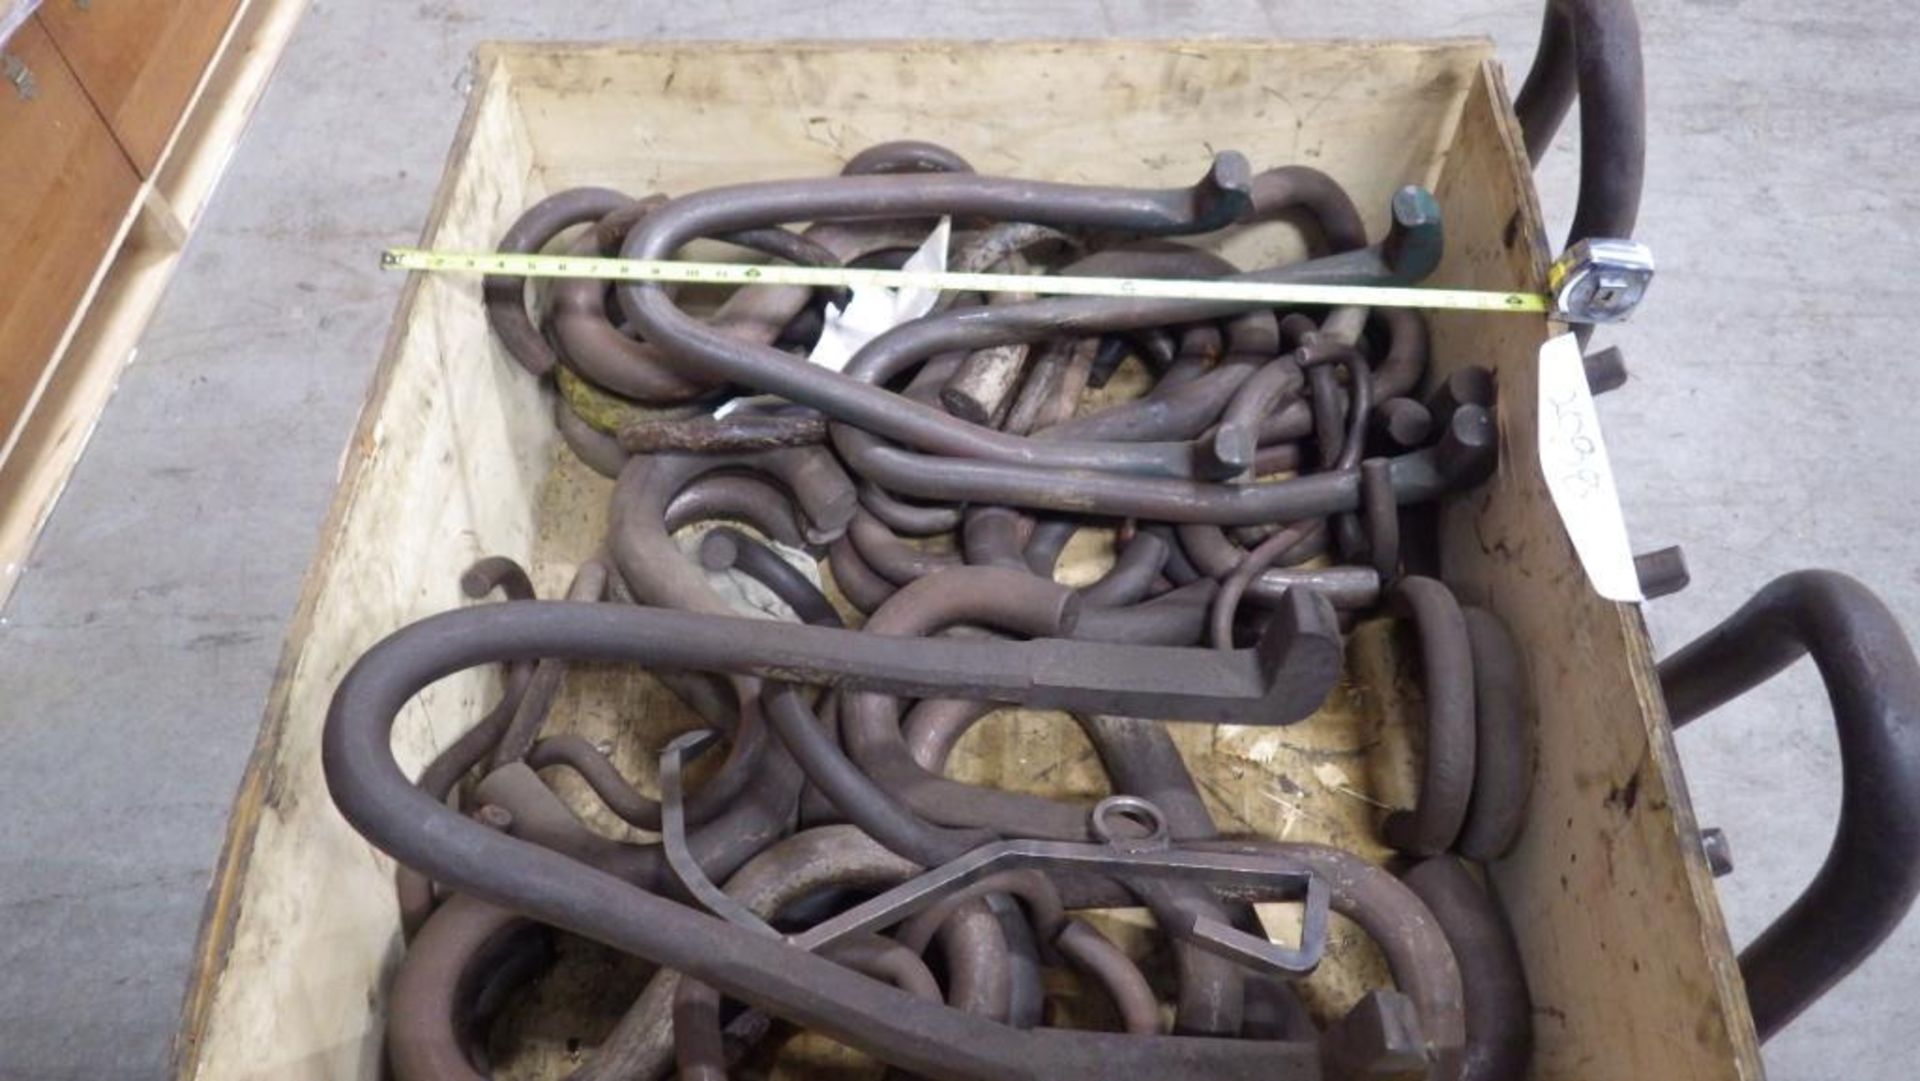 Lot c/o: Assorted Sized Large "S"-Hooks and Plate Hooks in ine box skid - Image 3 of 6